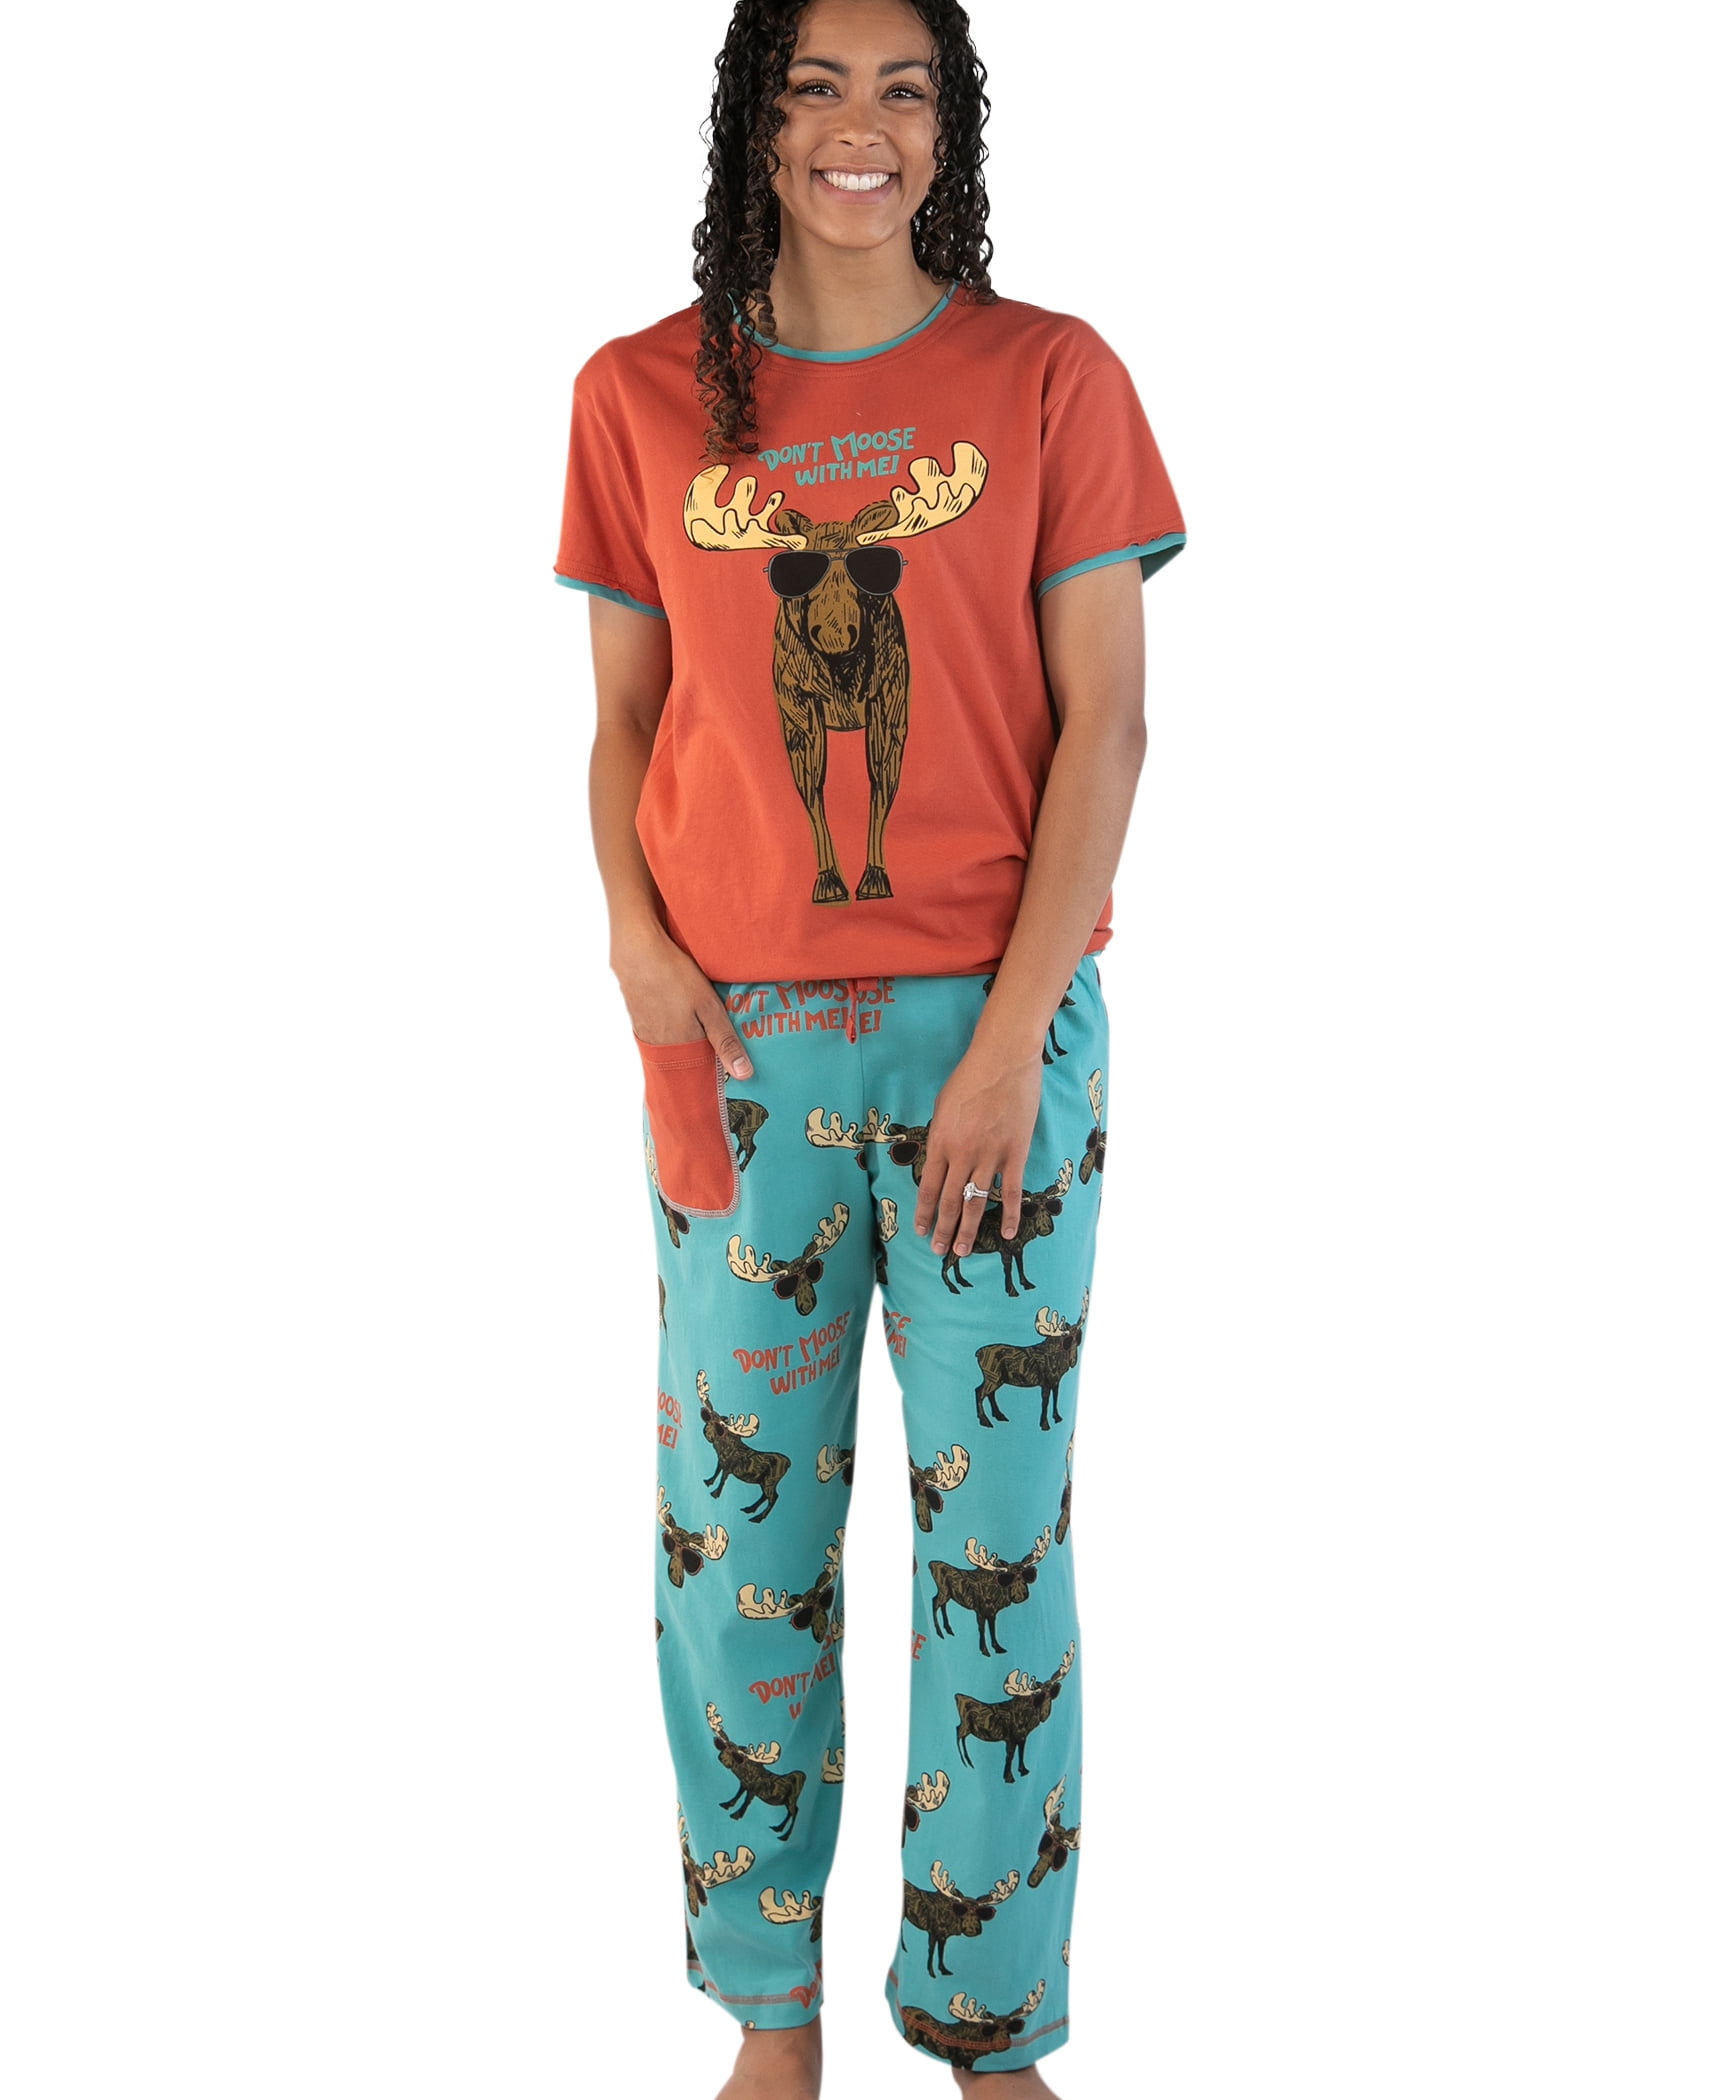 Lazy One Women's Pajama Set, Short Sleeves with Cute Prints, Relaxed Fit,  Don't Moose With Me 